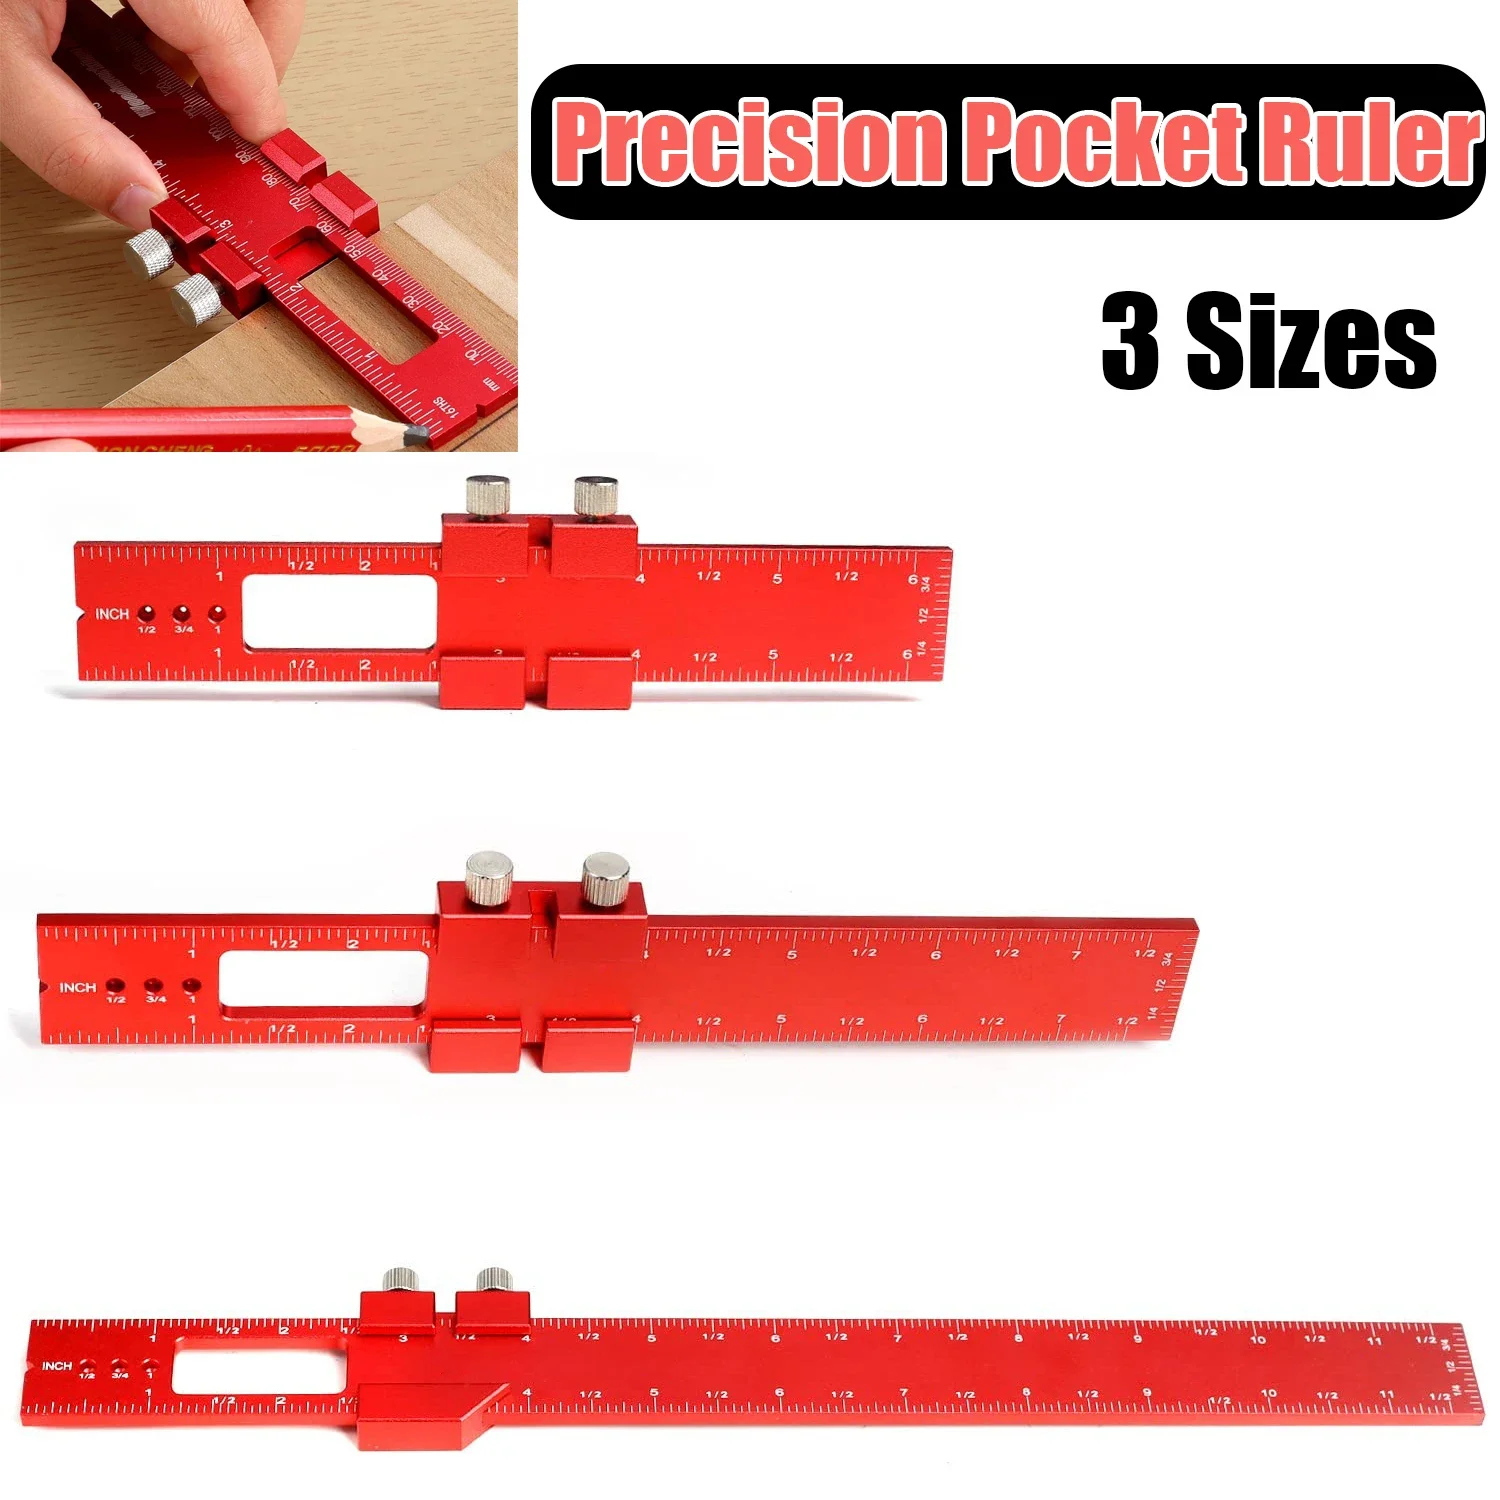 

Precision Pocket Ruler Aluminum Layout Positioning Scribing Gauge Measuring Tool with Metric & Imperial Scales Carpenter Tools